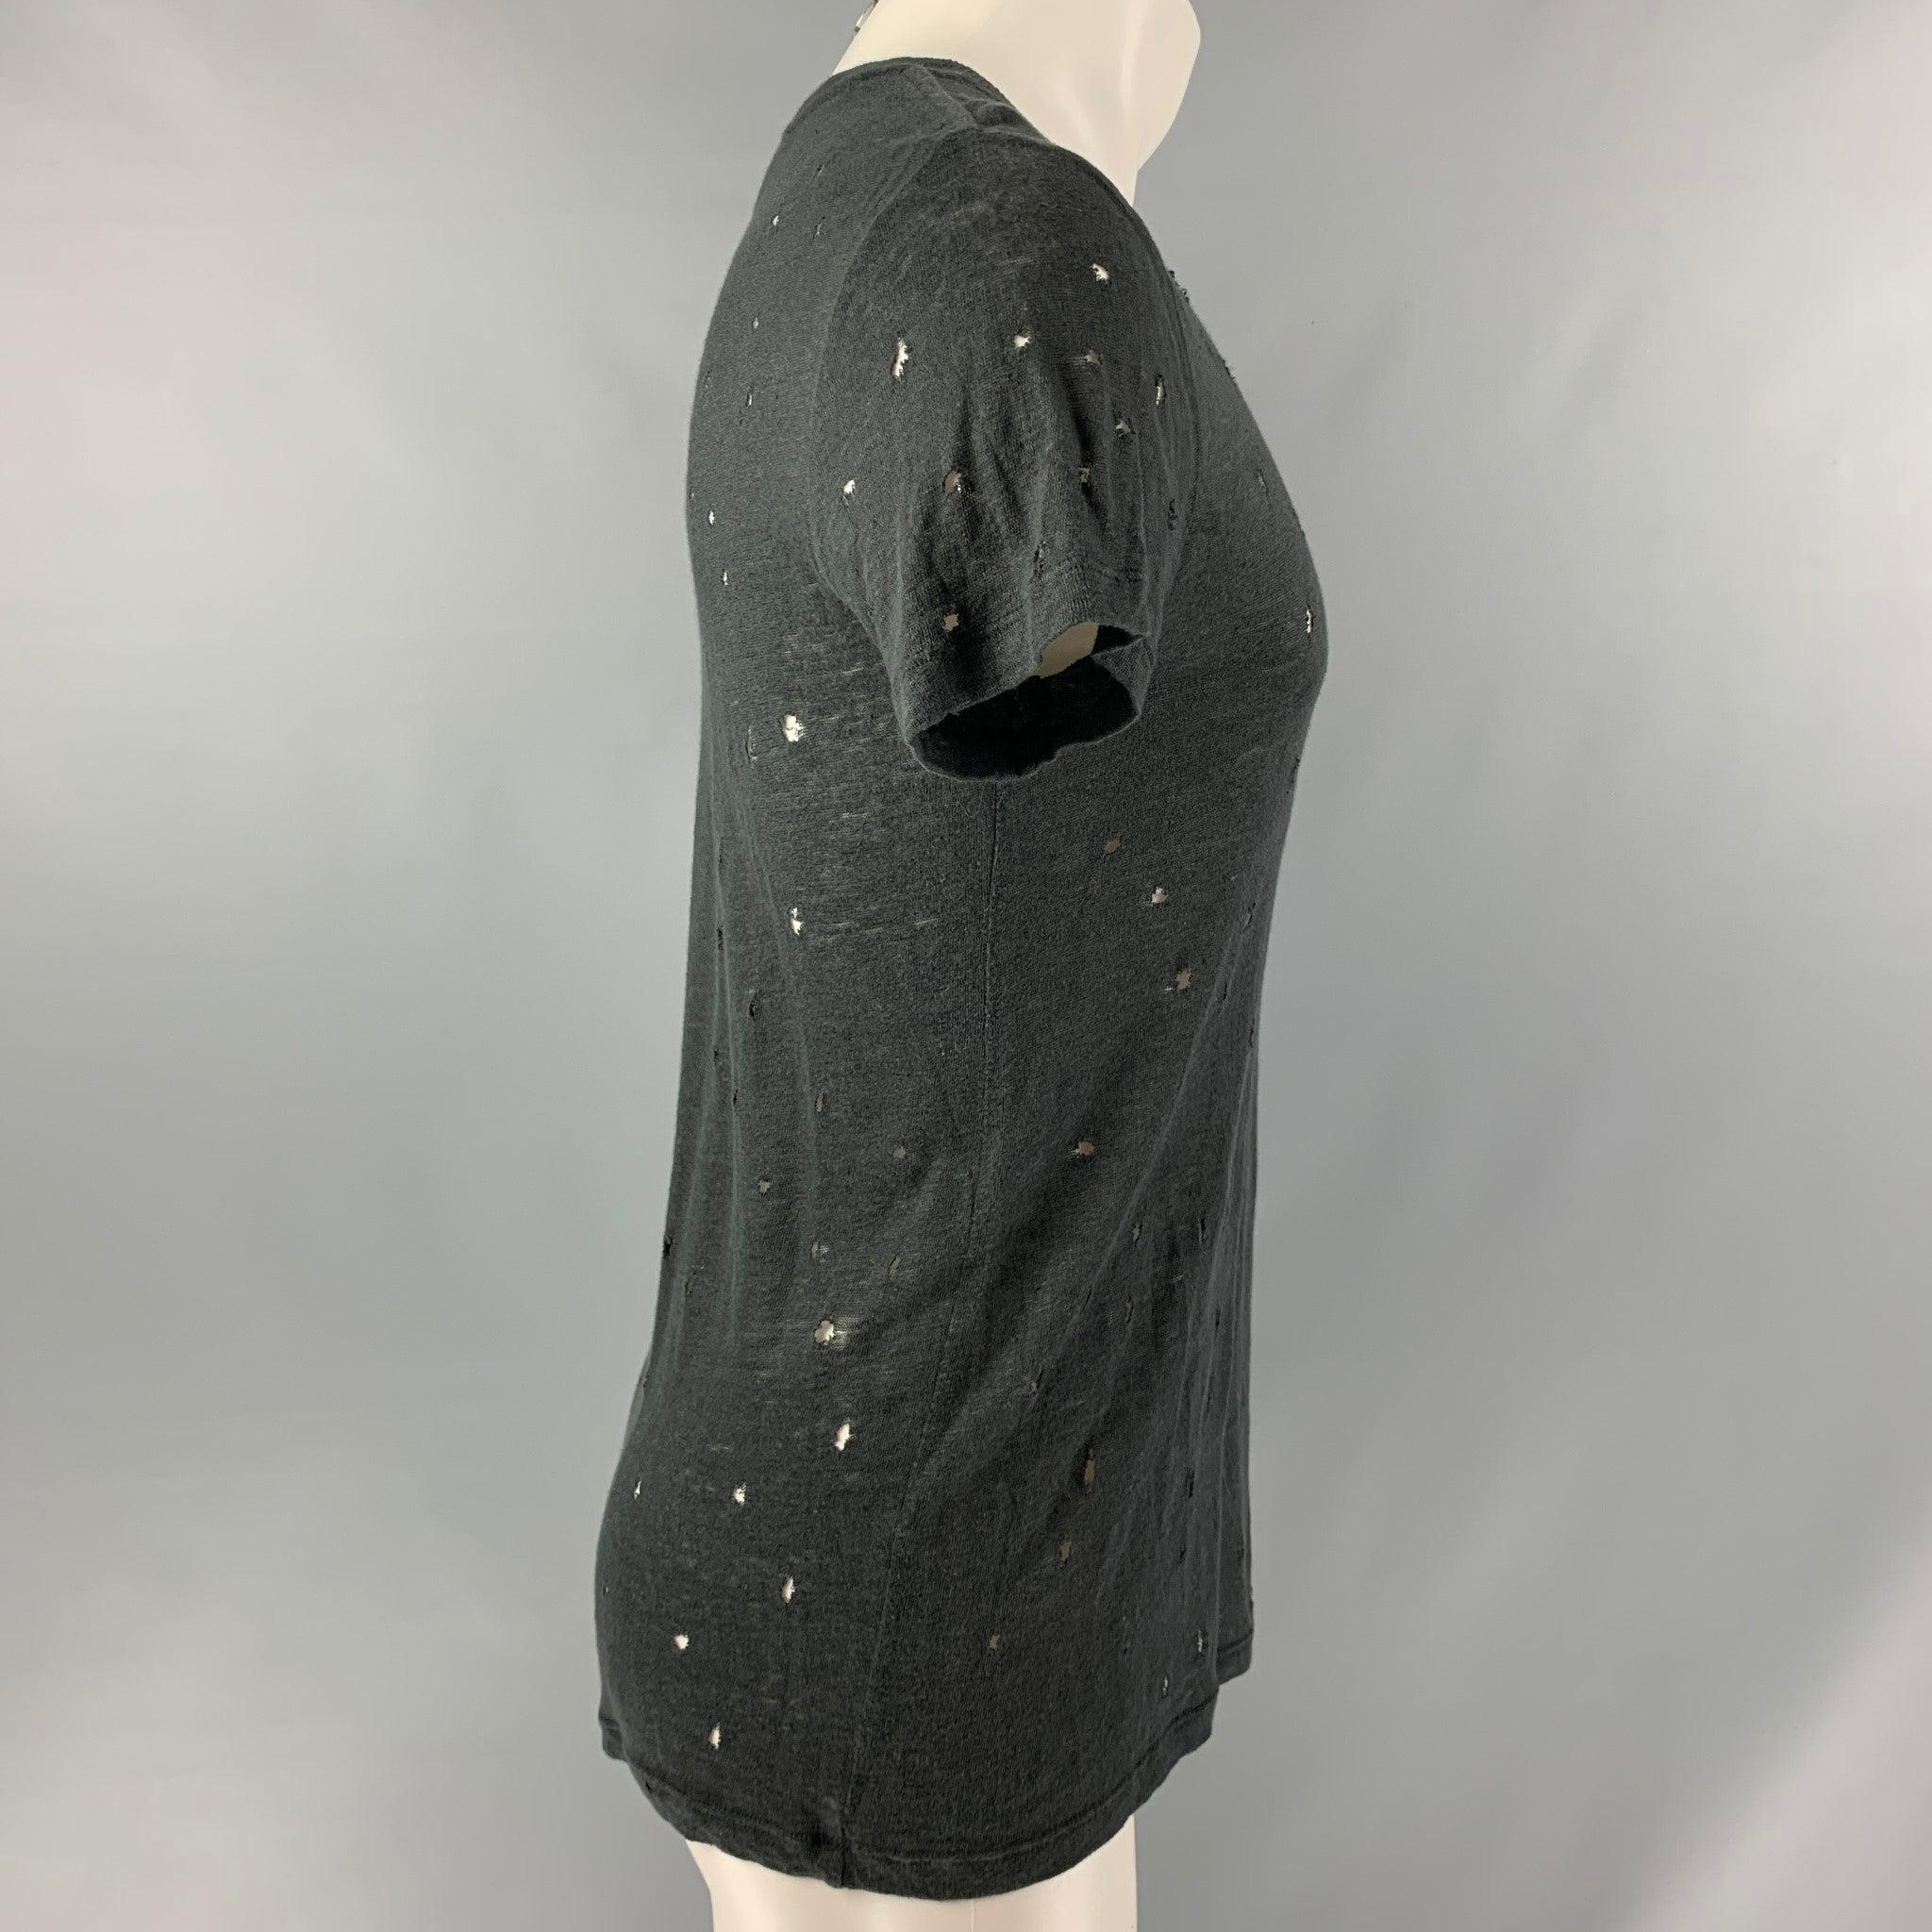 IRO 'Clay' t-shirt comes in a black linen featuring distressed details throughout and a crew-neck. Made in Portugal. Very Good Pre-Owned Condition.  

Marked:   S 

Measurements: 
 
Shoulder: 18 inches Chest: 46 inches Sleeve: 8 inches Length: 26.5